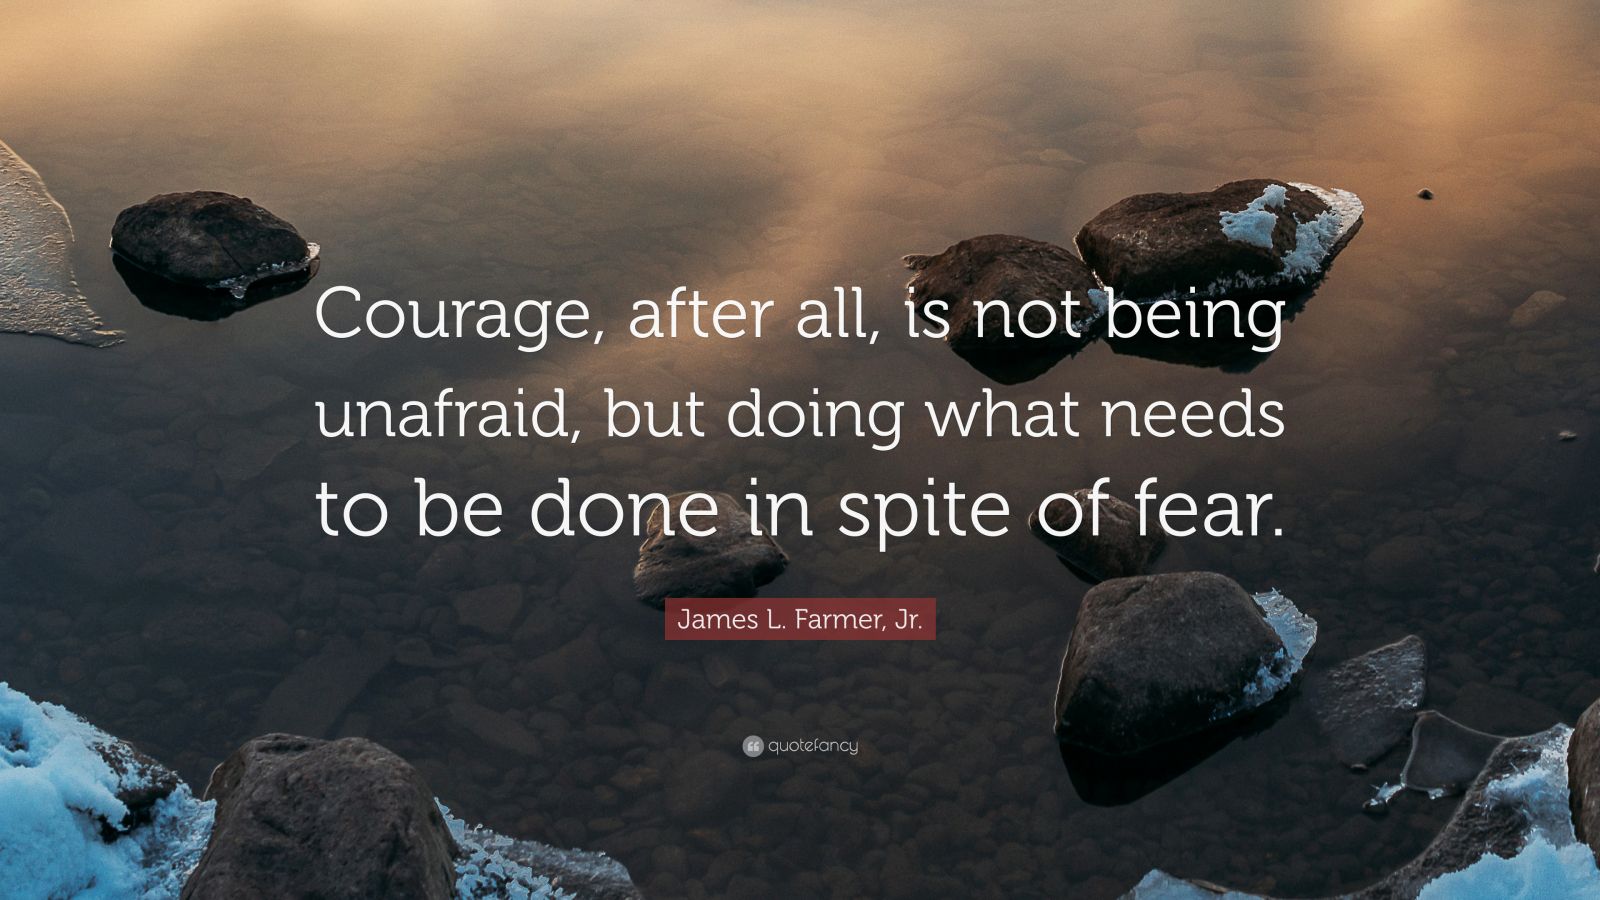 James L. Farmer, Jr. Quote: “Courage, after all, is not being unafraid ...